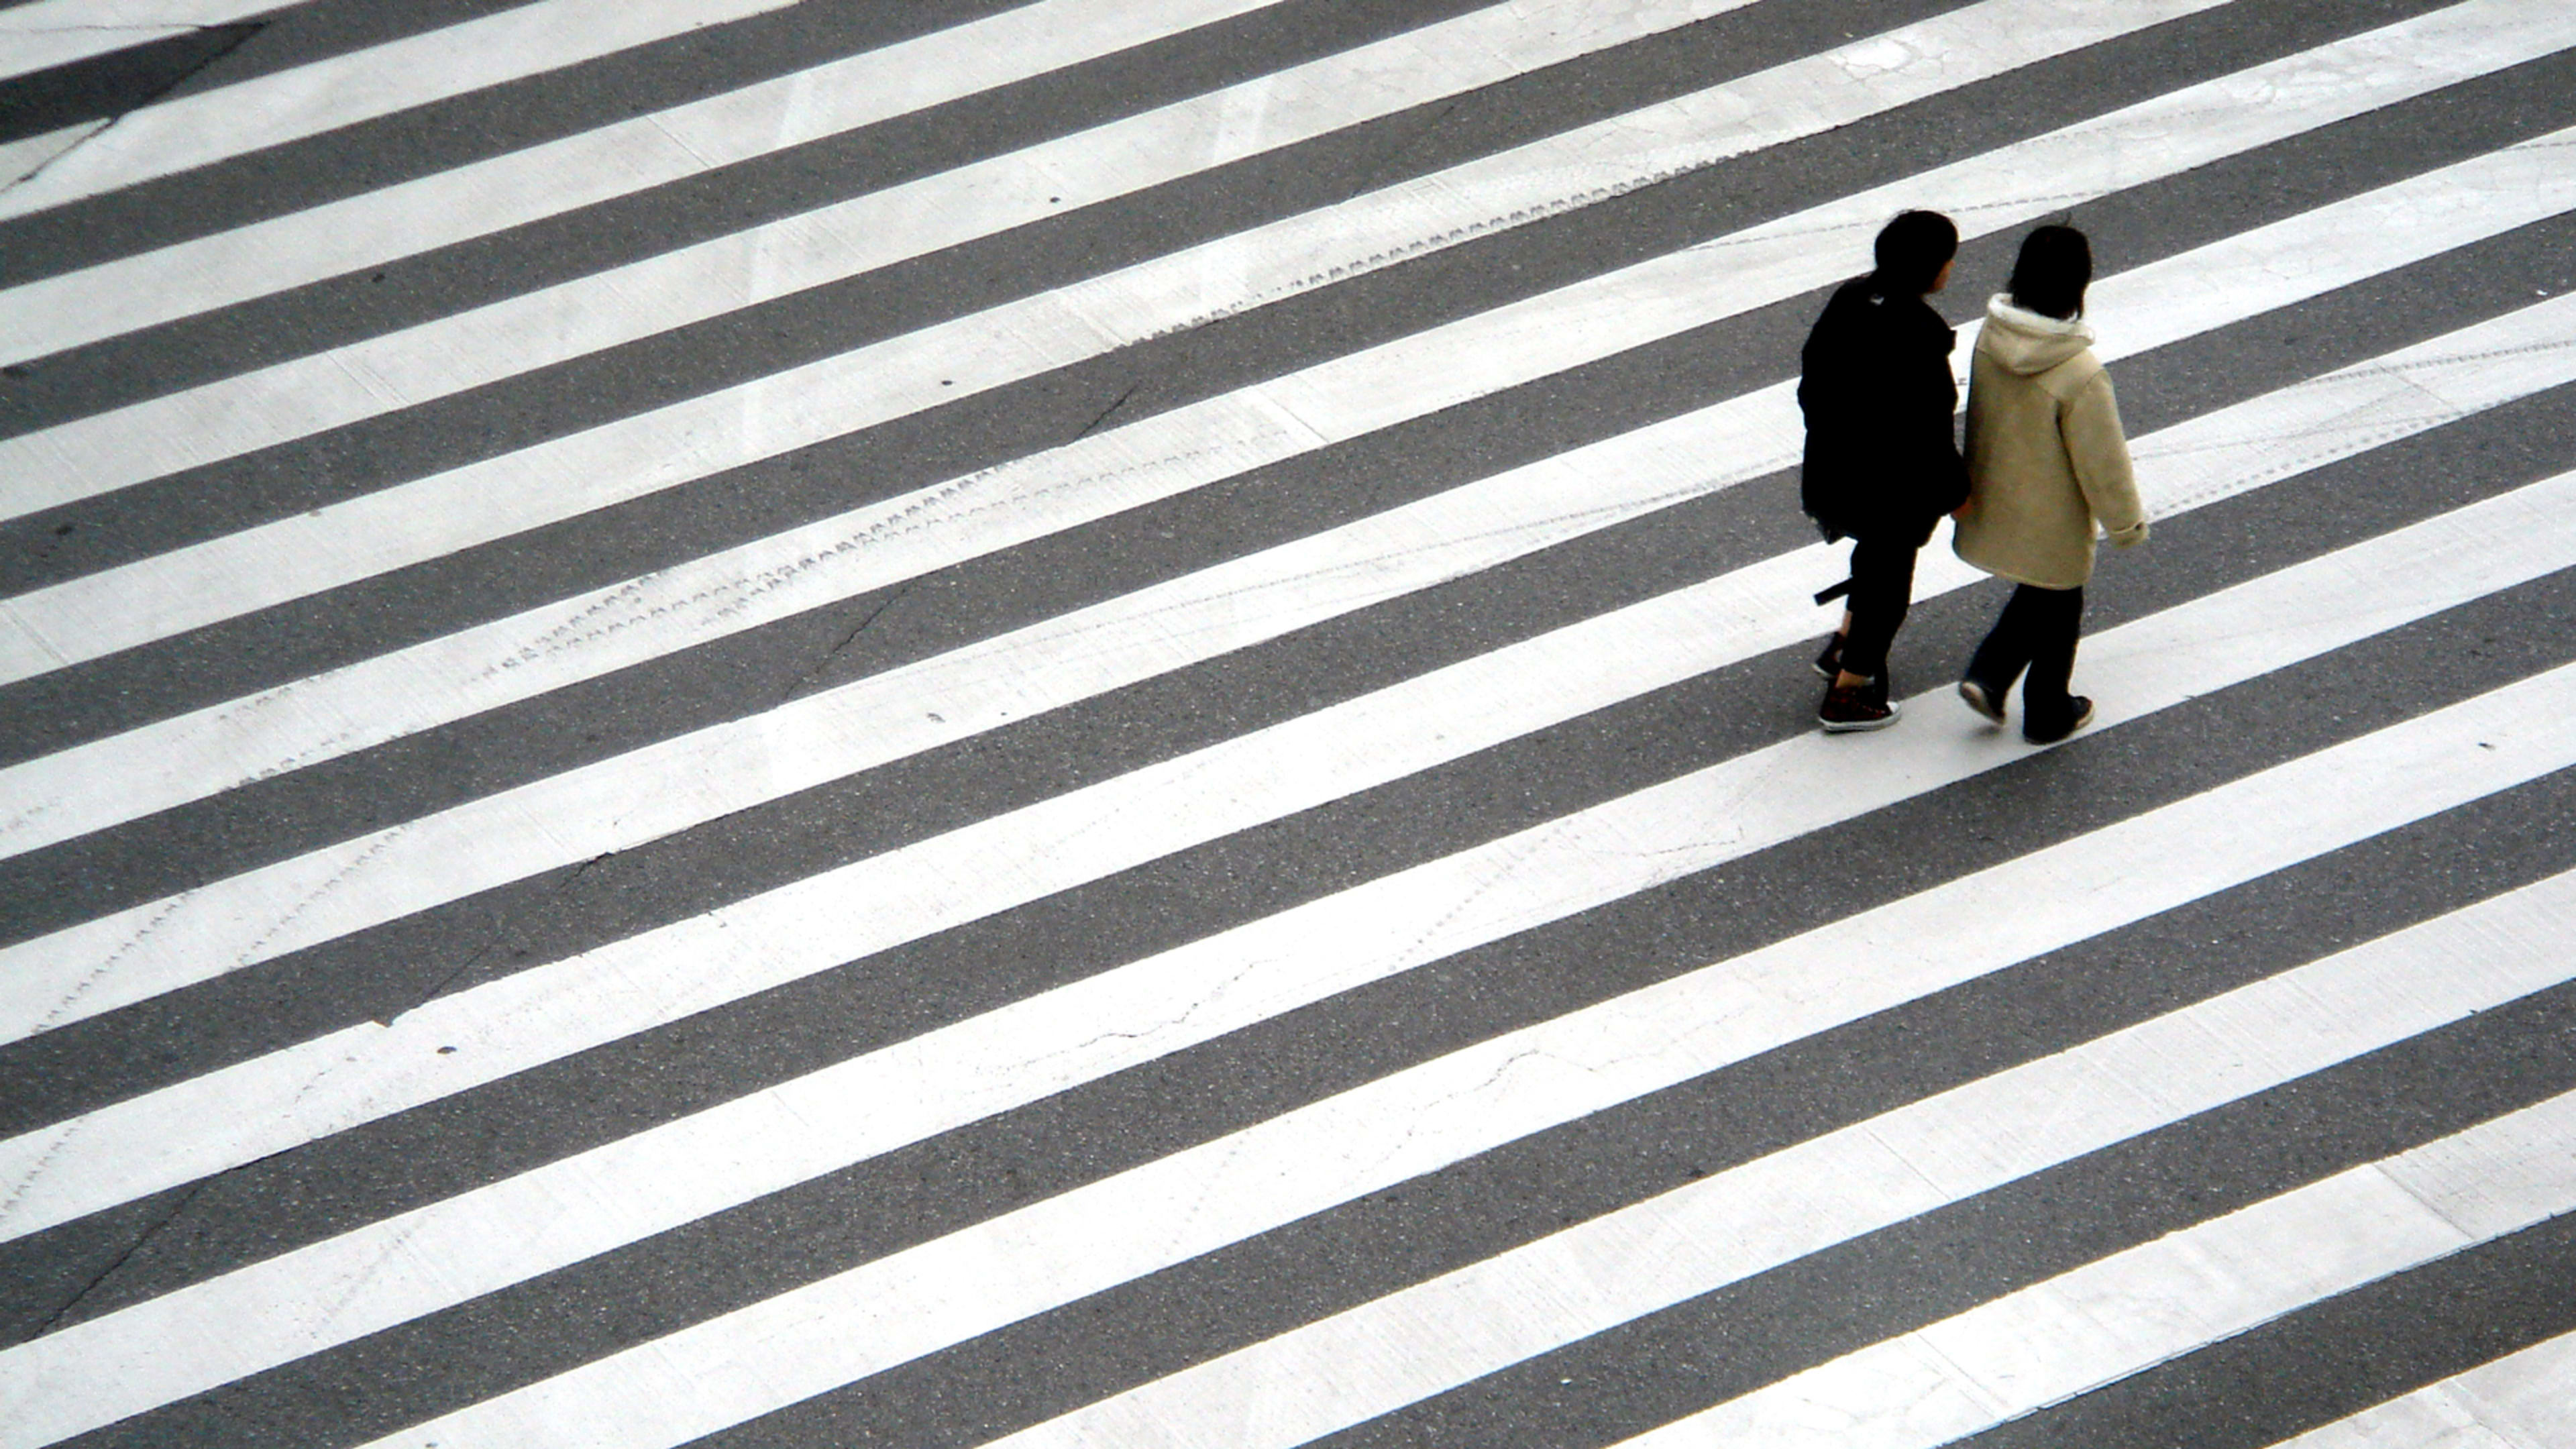 China is using AI and facial recognition to fine jaywalkers via text